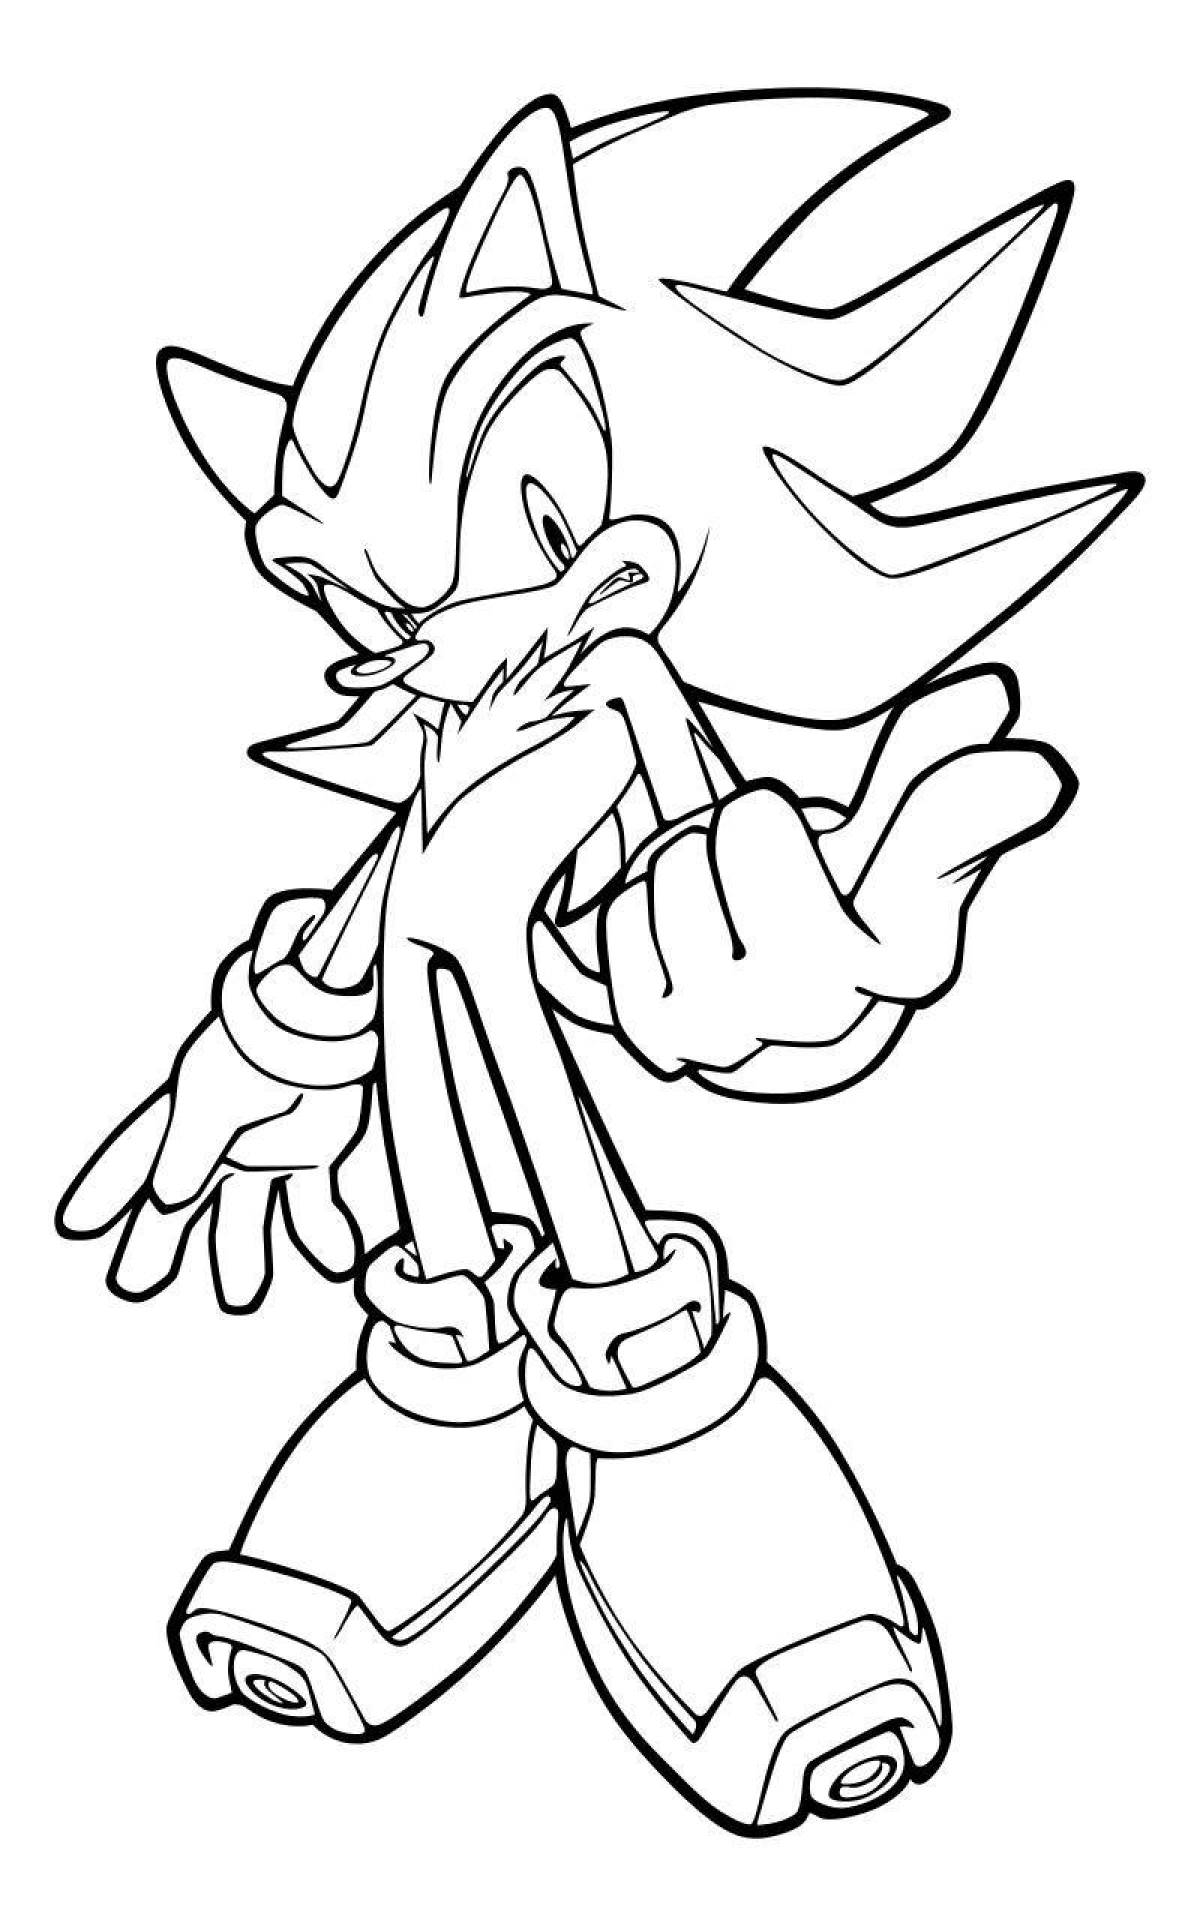 Radiant dark sonic coloring page